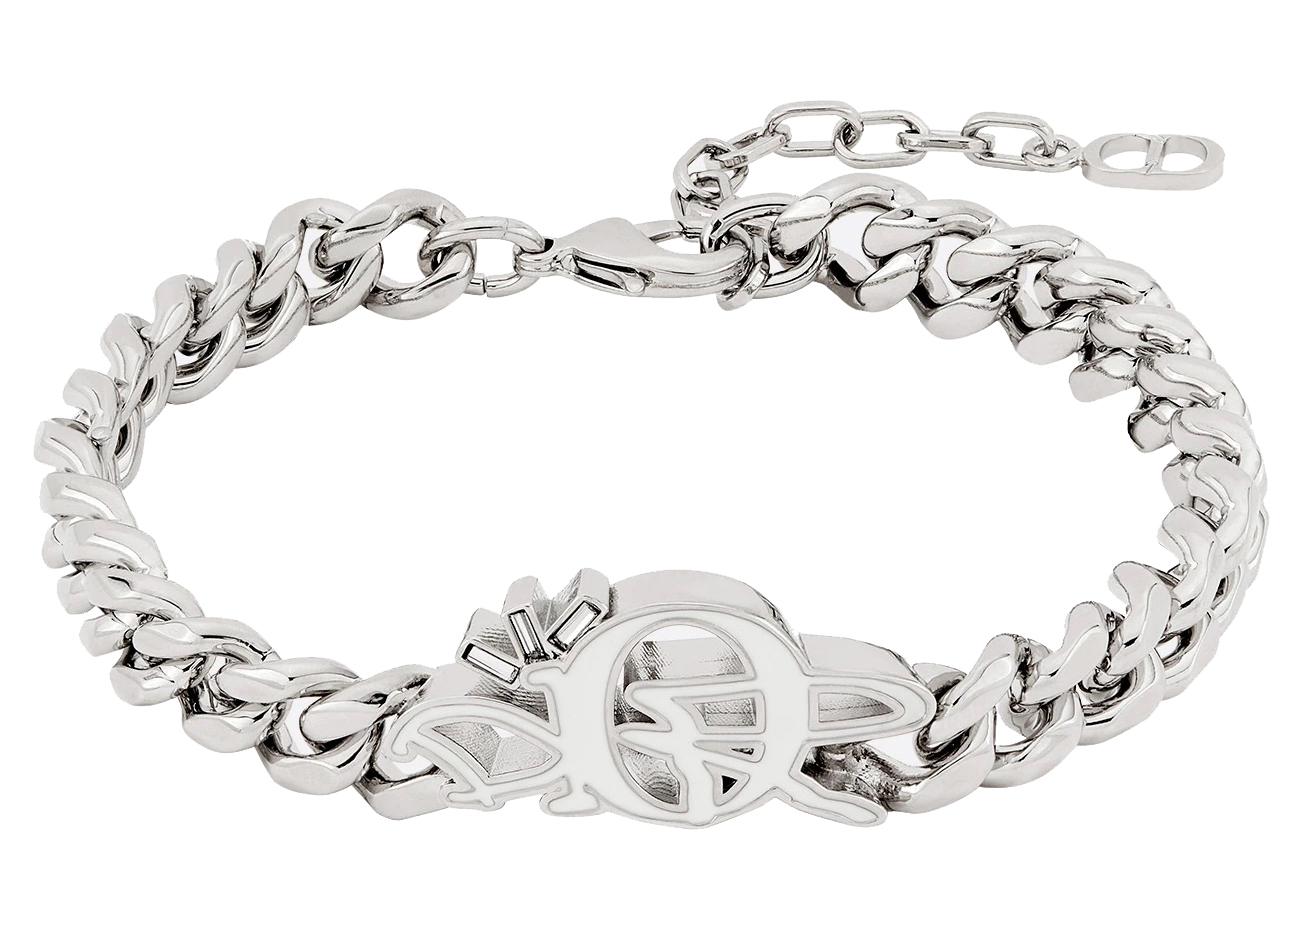 Dior x CACTUS JACK Chain Link Bracelet Silver in Silver Metal 